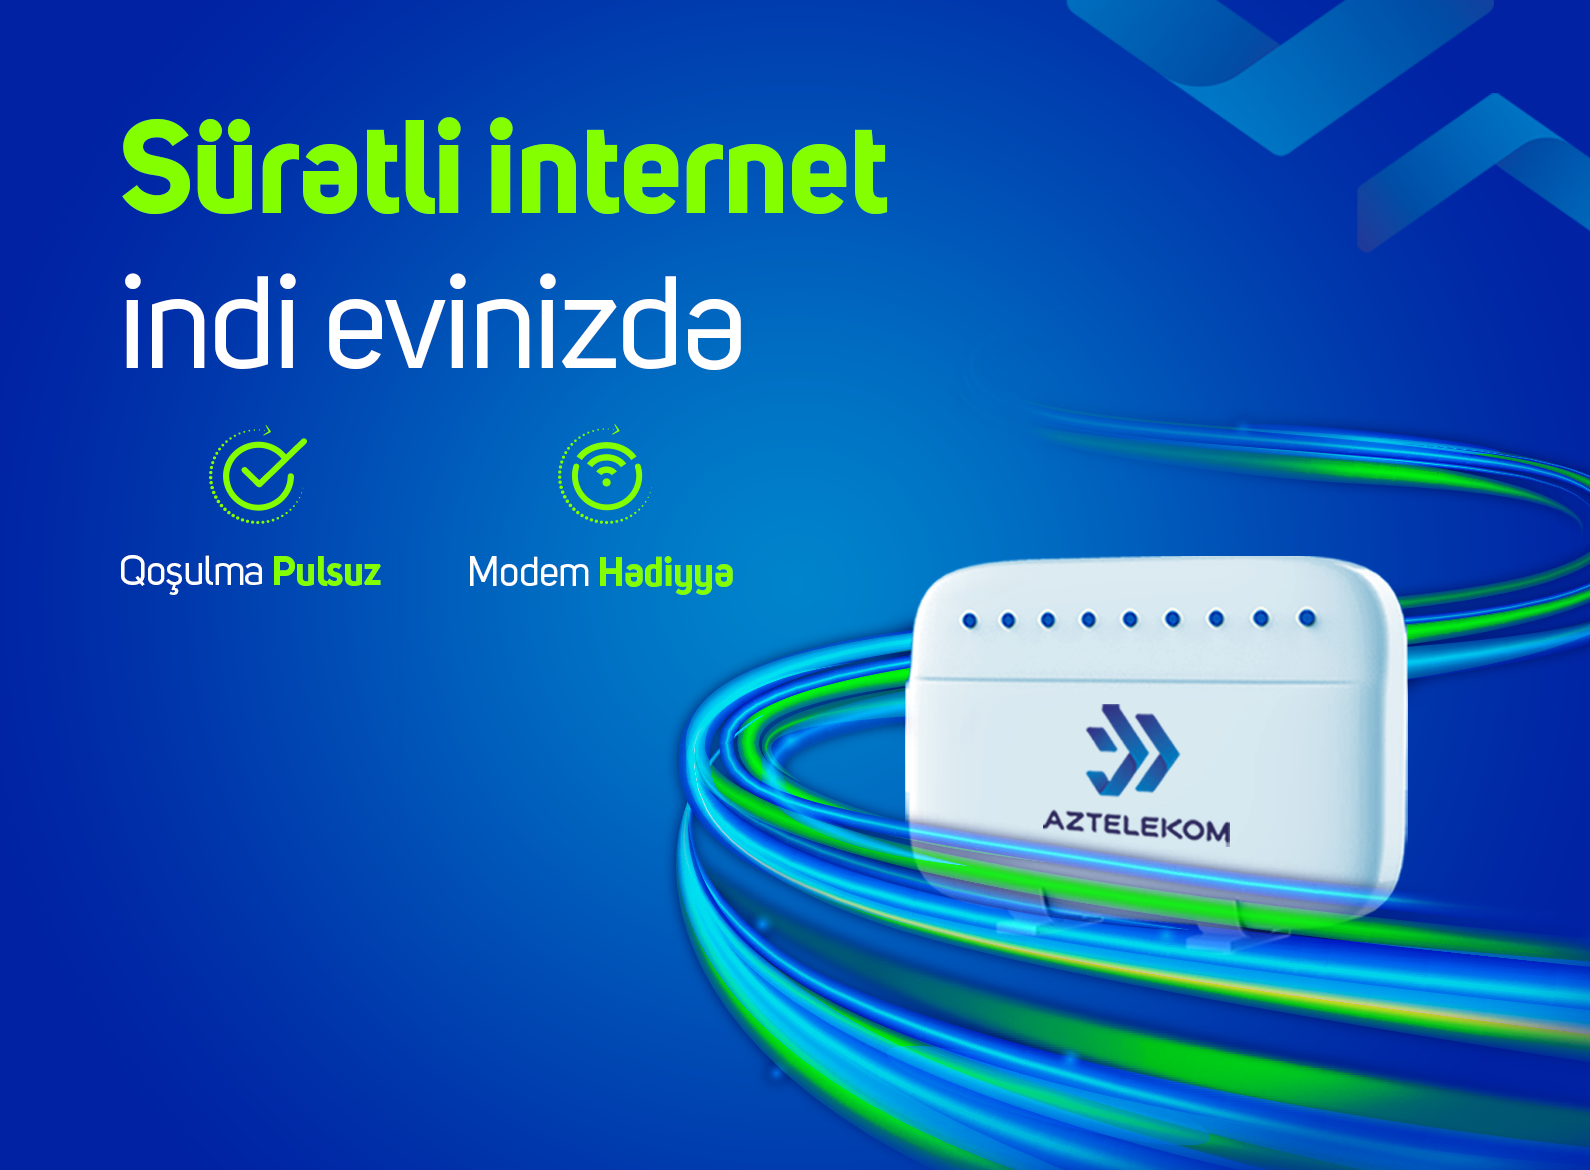 Fast internet is now at home